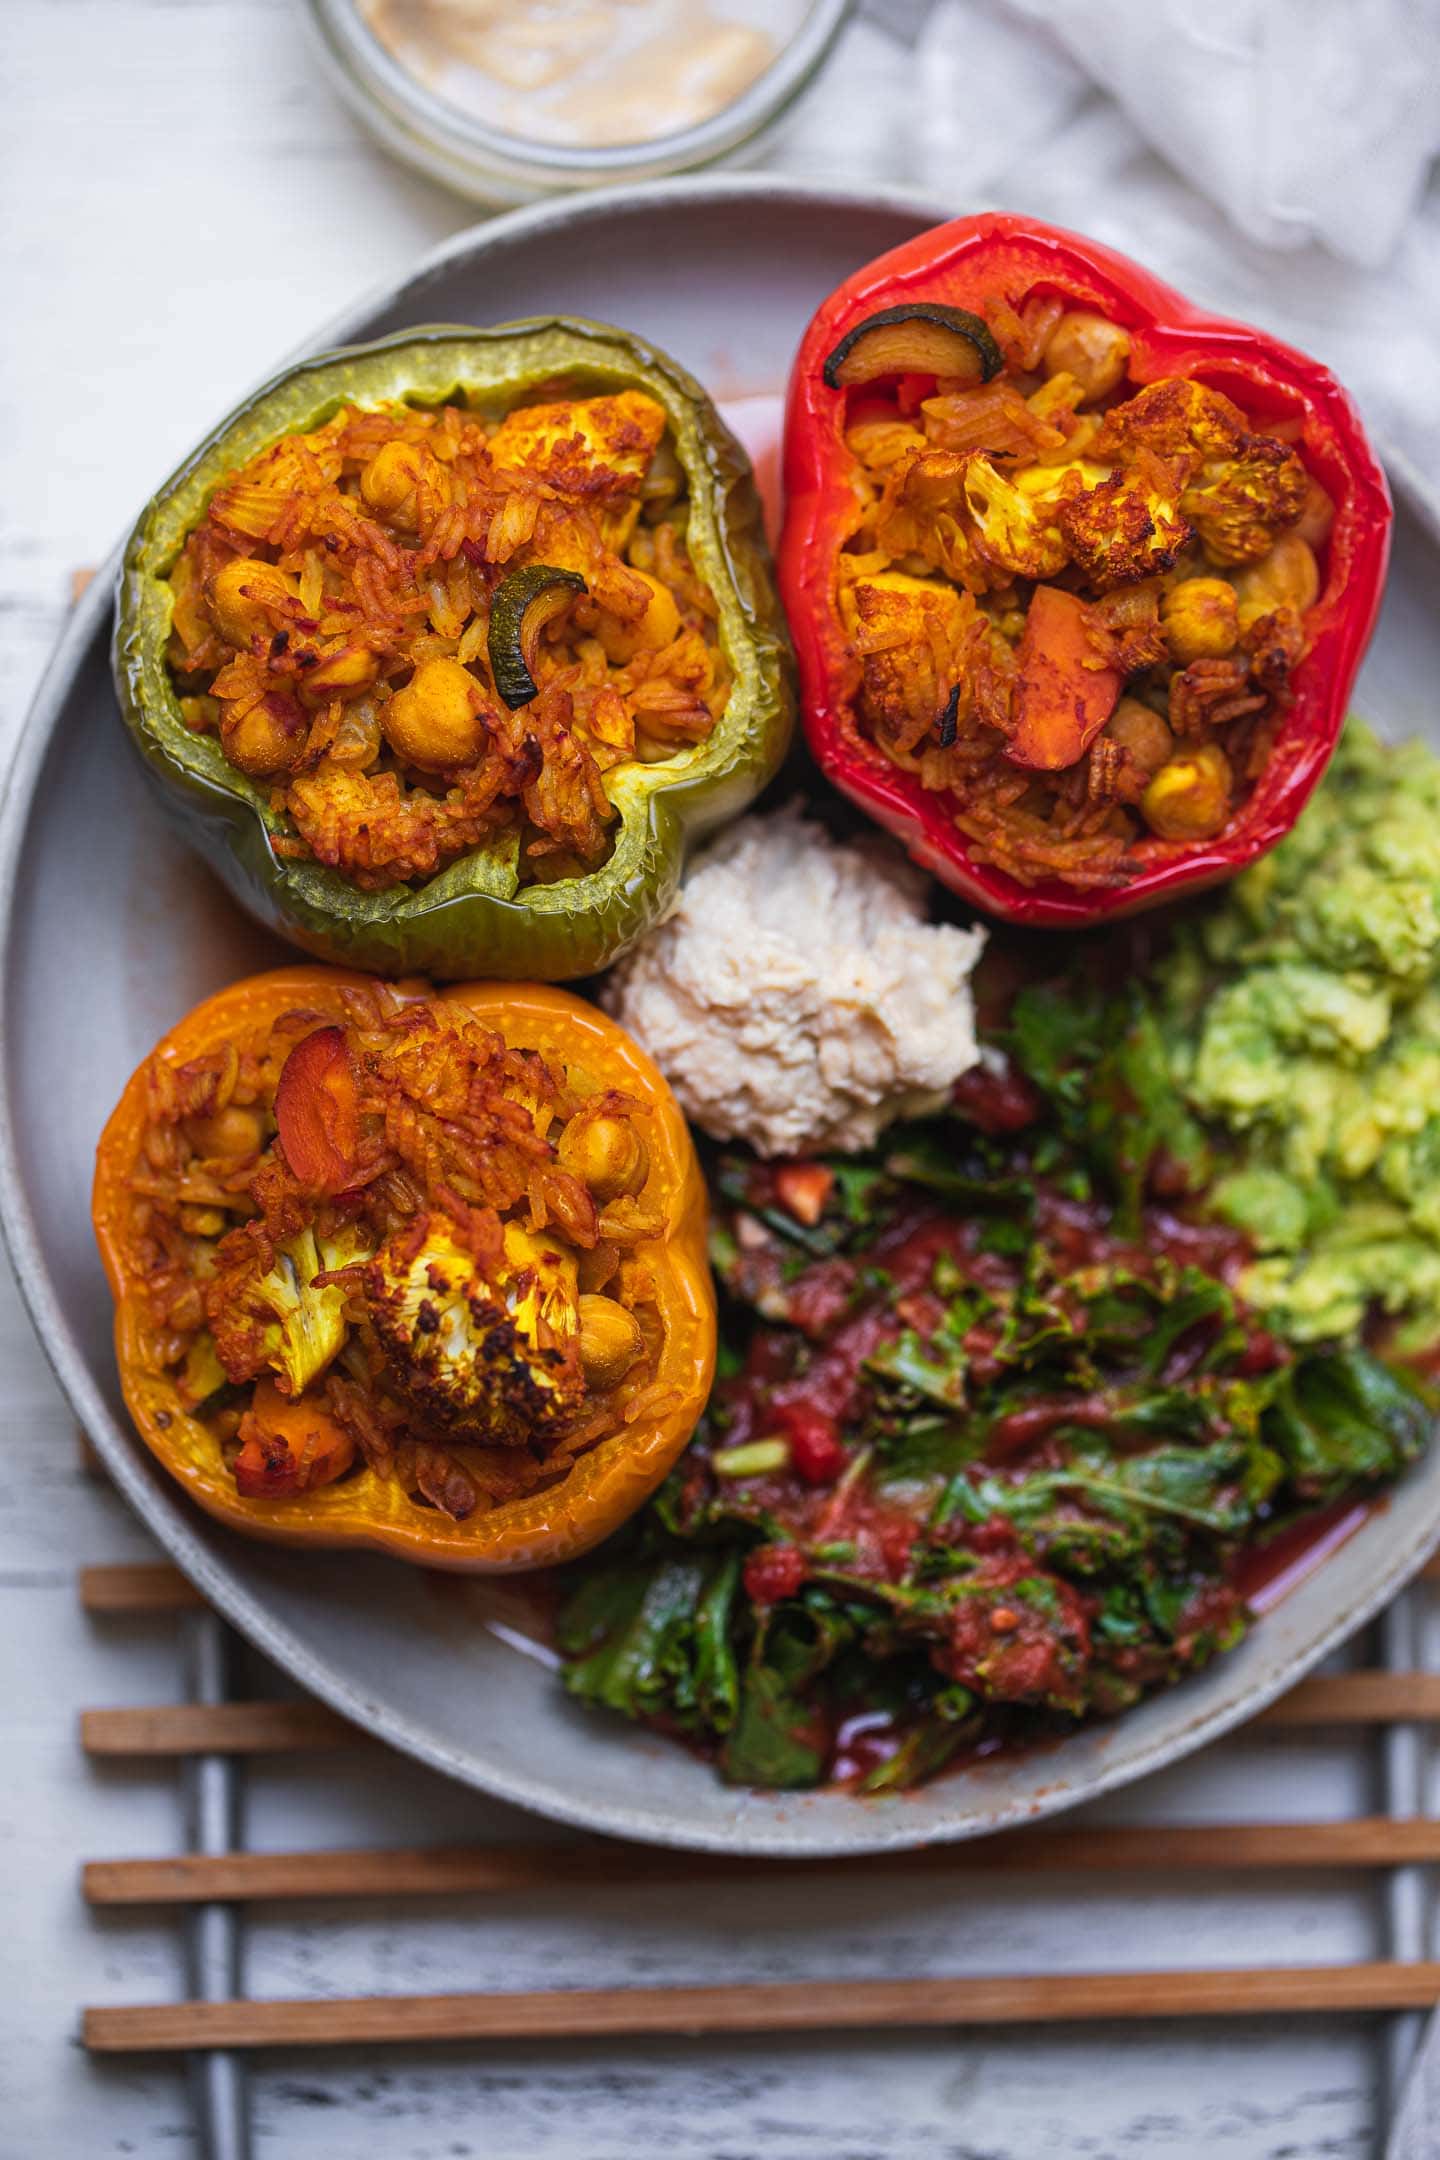 Chickpea And Cauliflower Vegan Stuffed Peppers Earth Of Maria,What Is A Dogs Normal Temperature Range